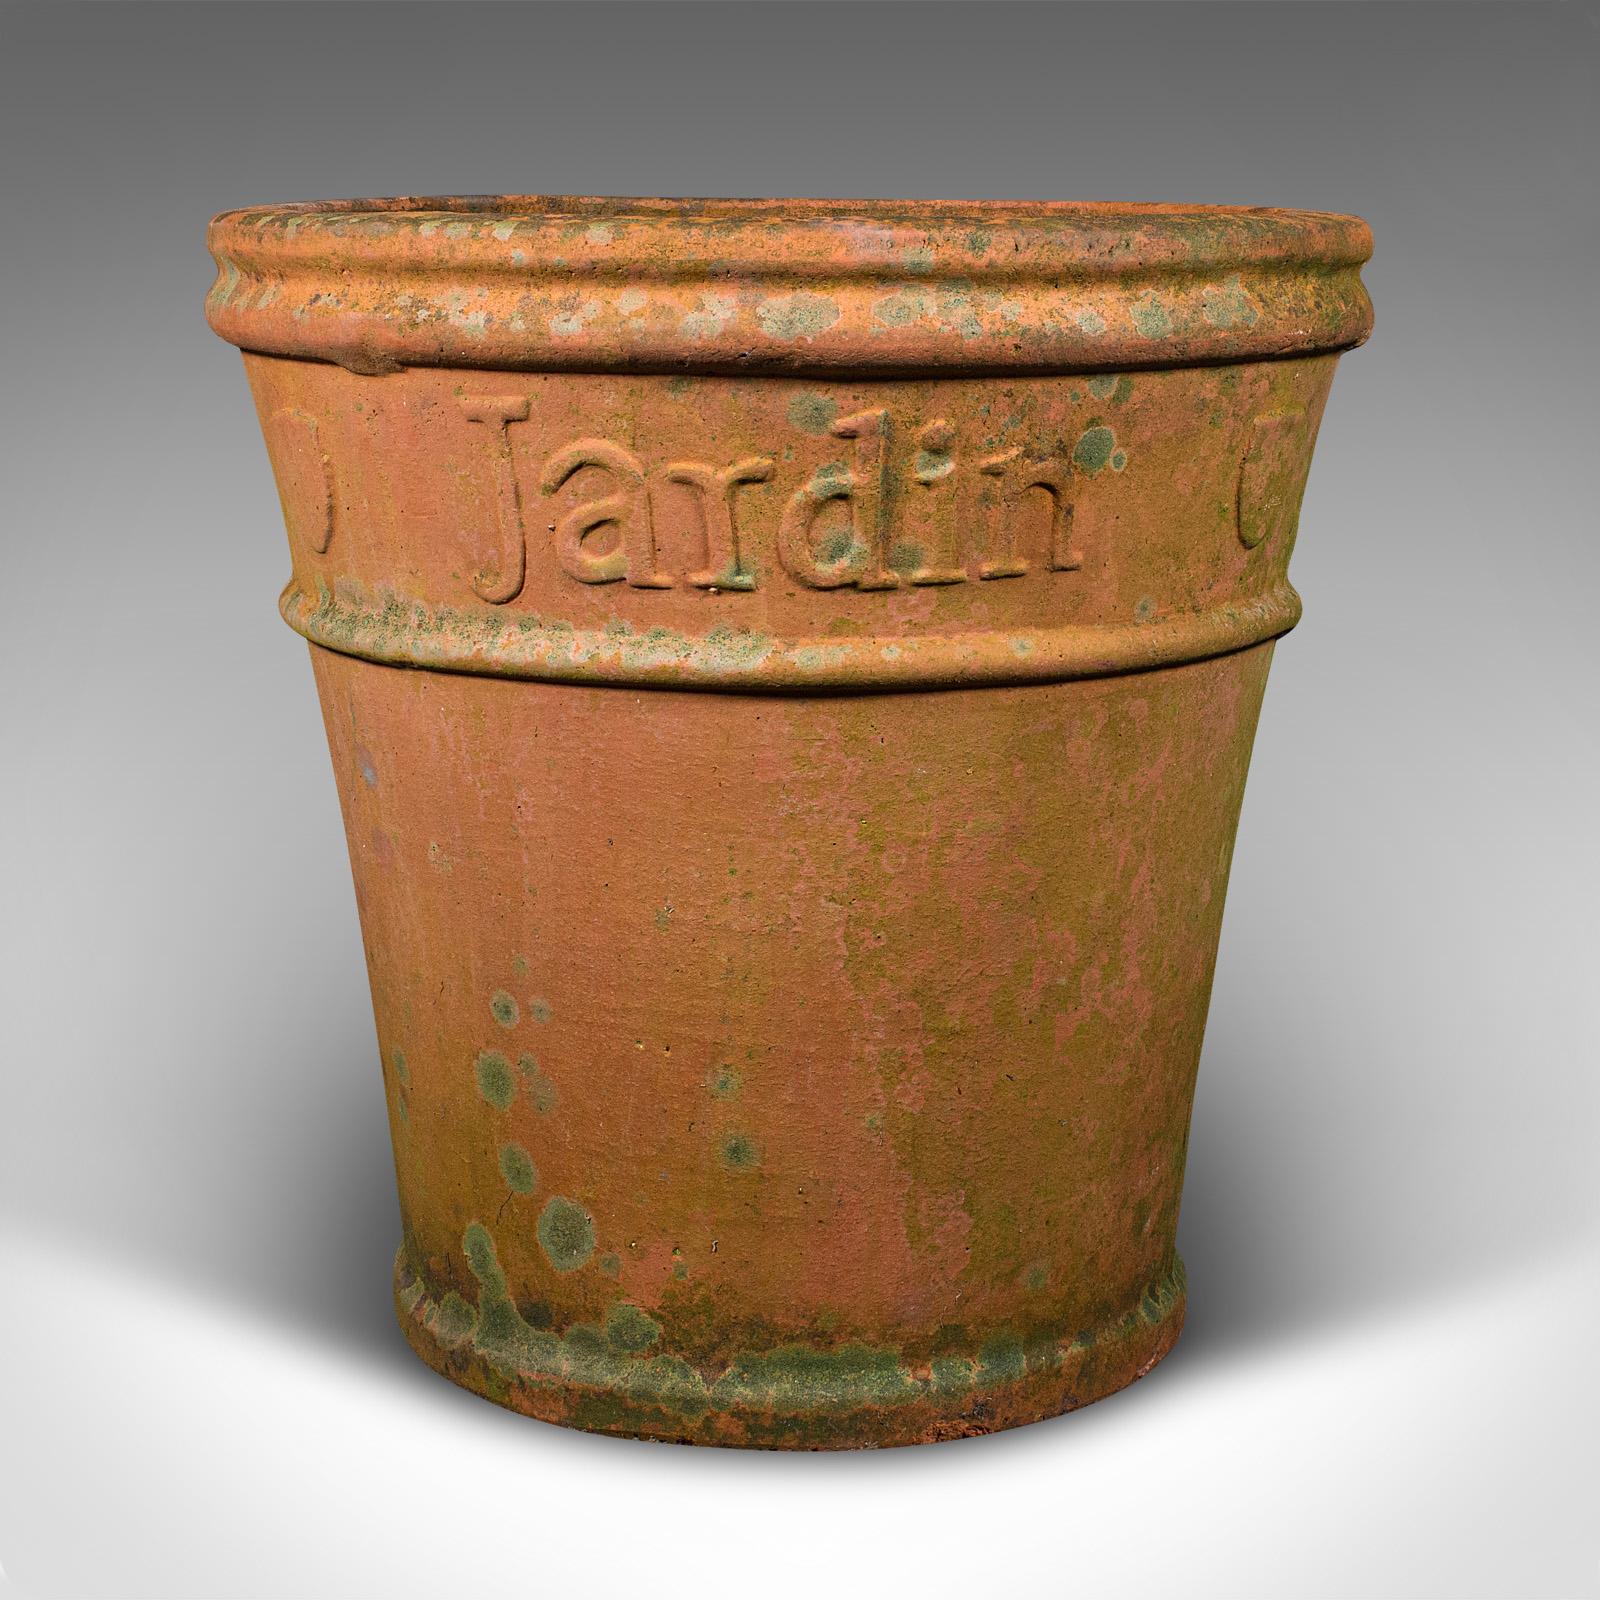 This is a large vintage ornamental tree planter. A French, terracotta jardiniere pot, dating to the mid 20th century, circa 1950.

Delightfully substantial and generously sized, ideal for olive or bay trees
Displays a desirable aged patina with